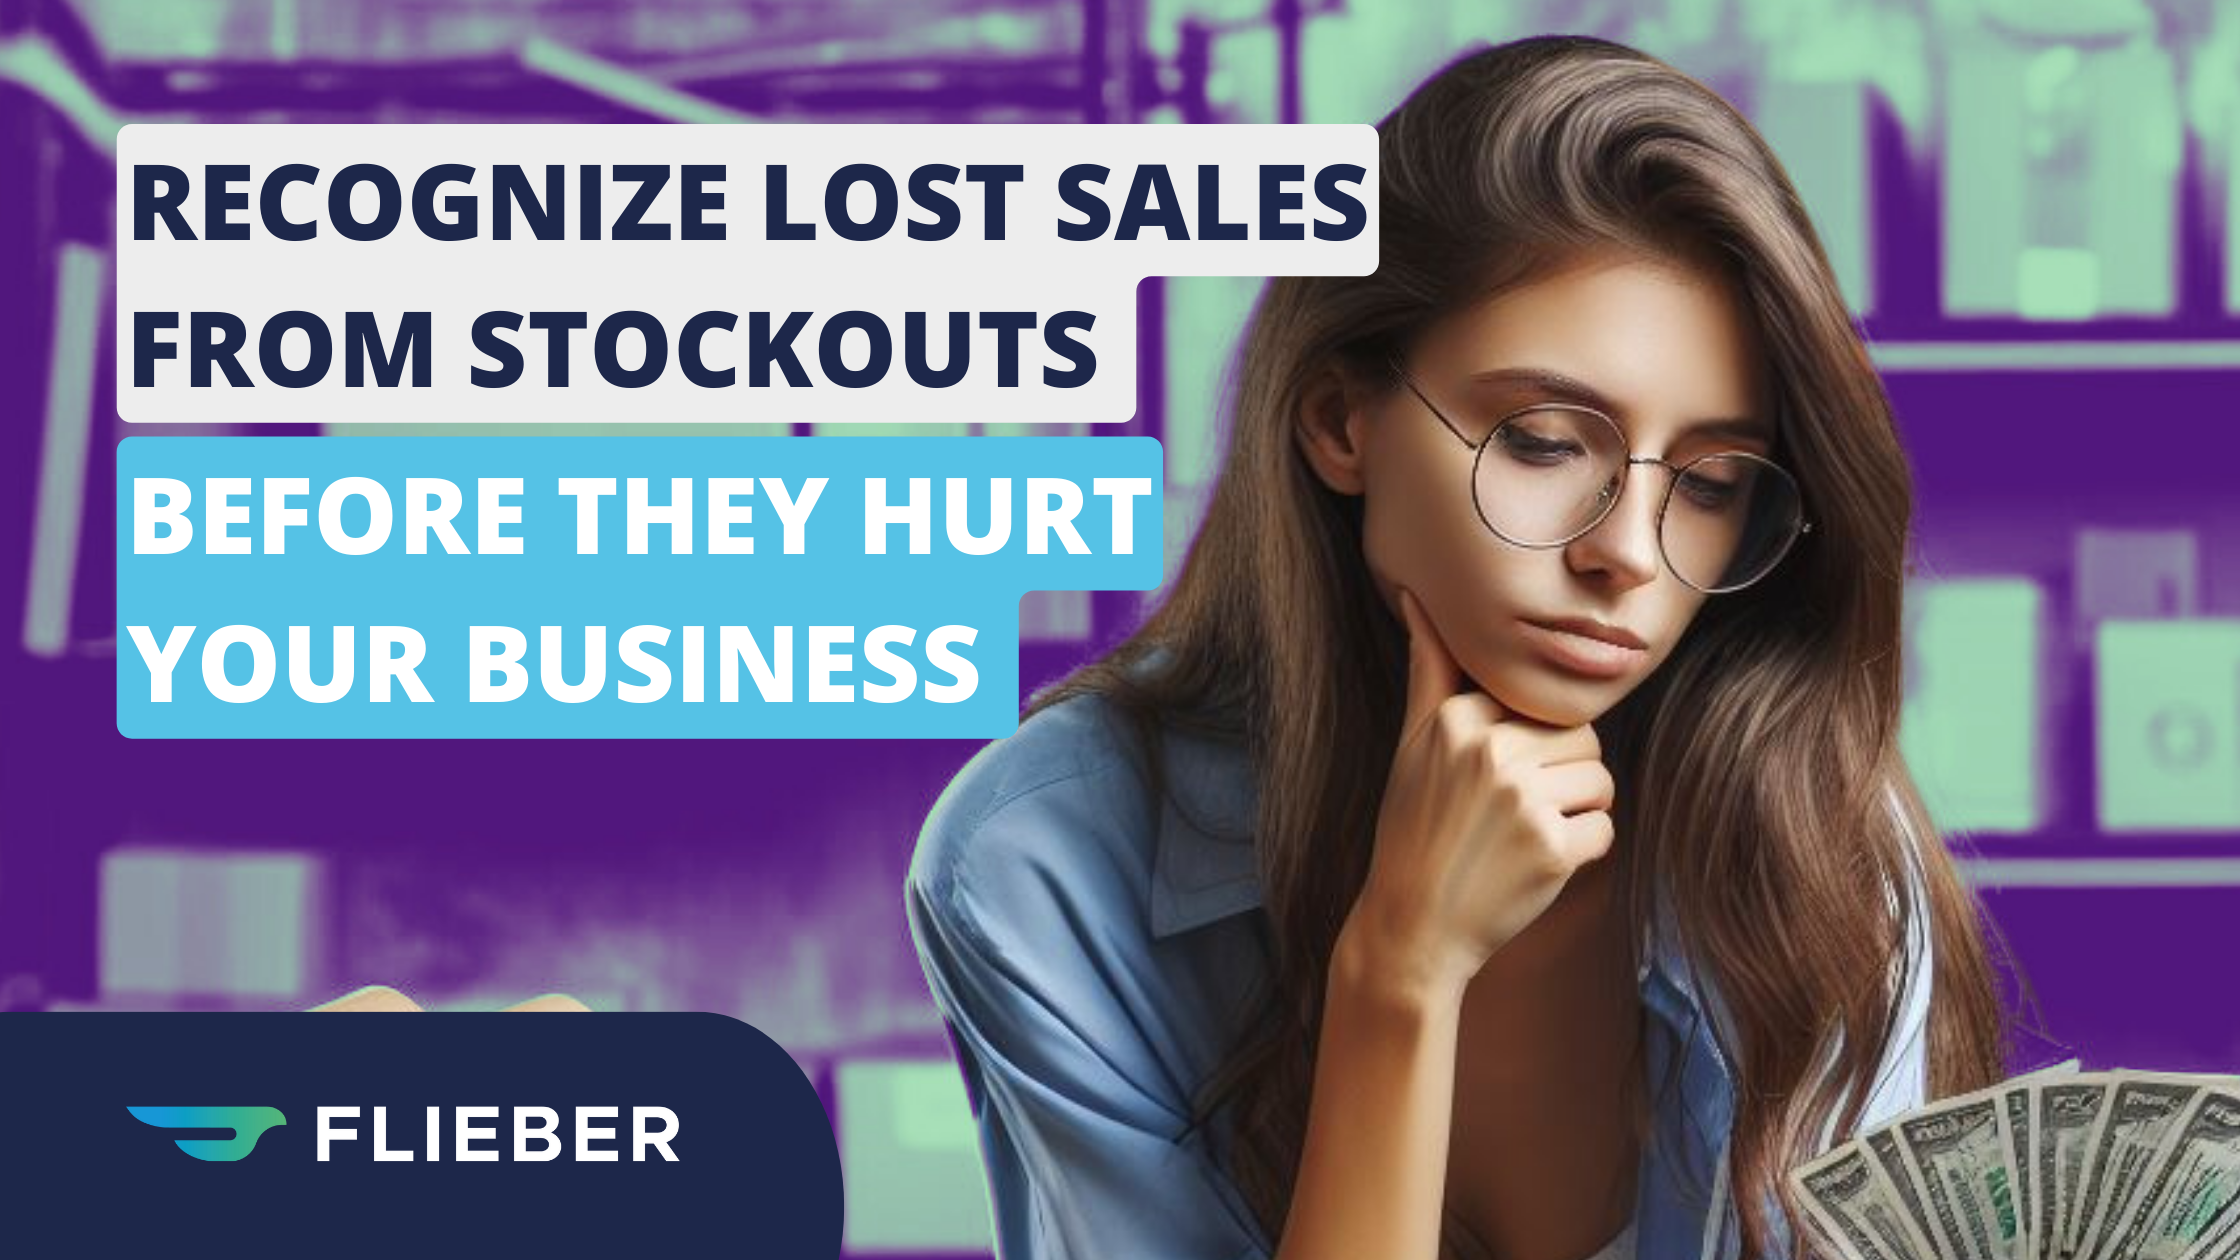 Got Stockouts? Know the Telltale Signs of Lost Sales from Stockouts